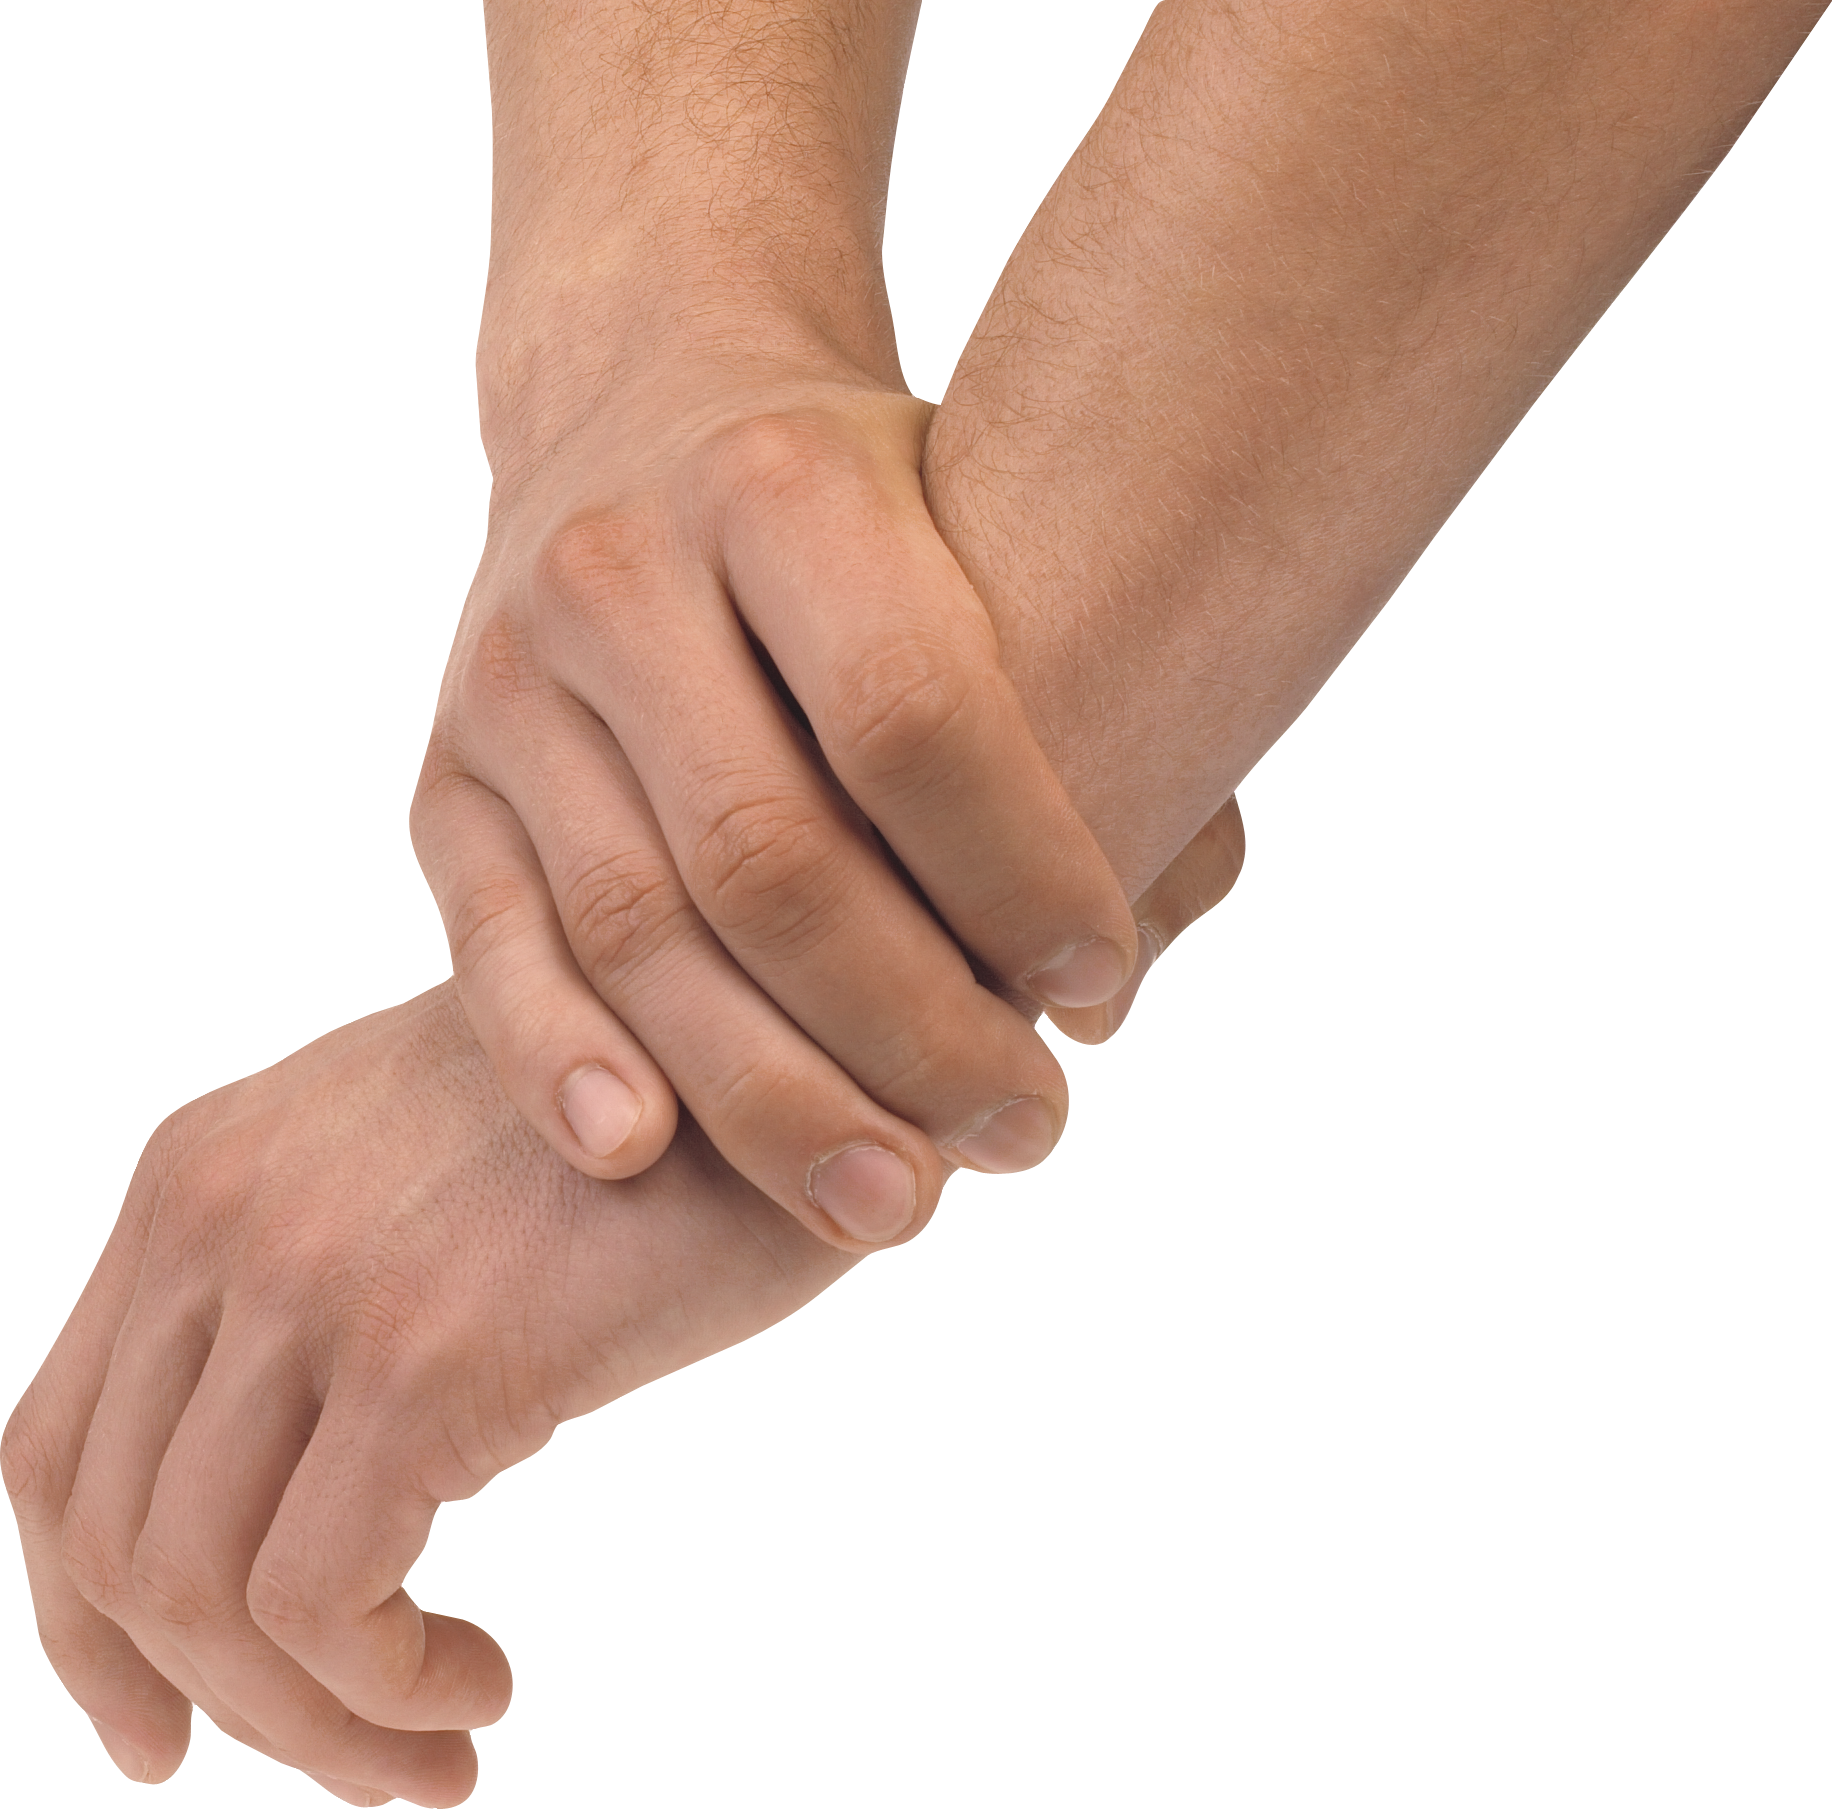 Hands Png Hand Image Free Transparent Image Download Size 1832x1809px